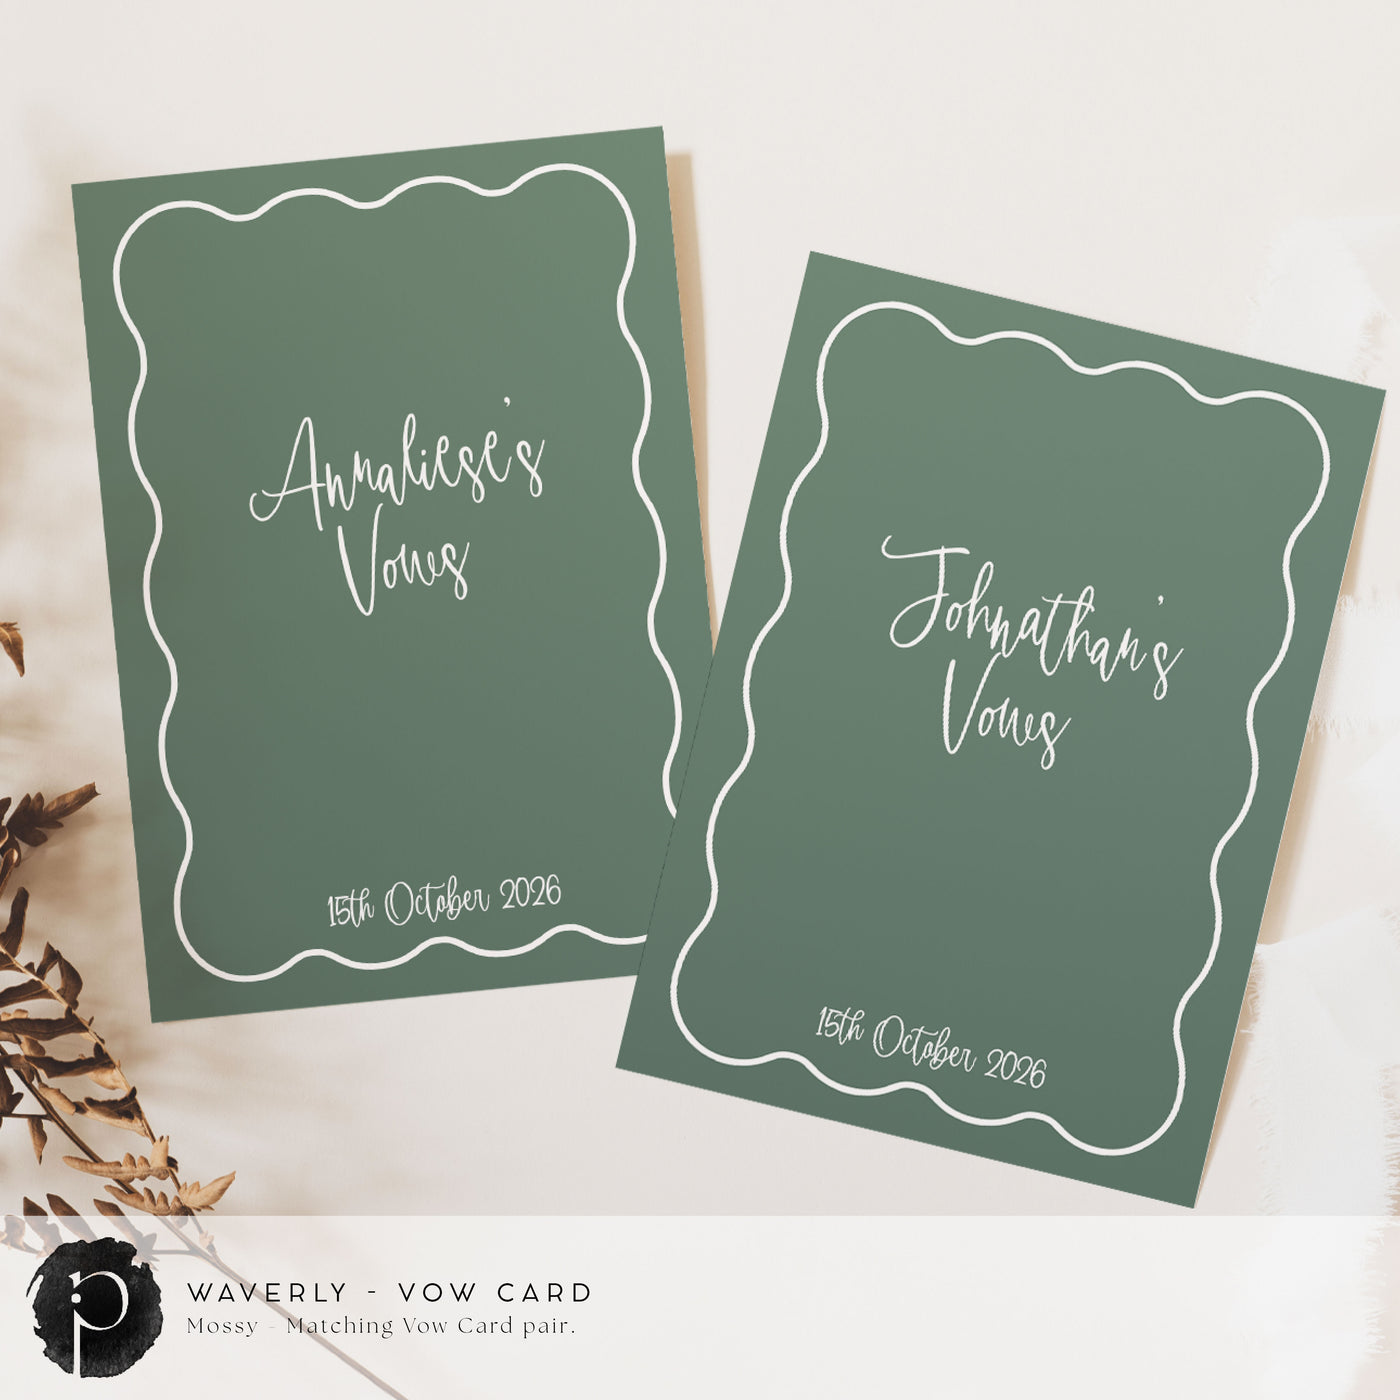 A pair of vow cards to write your wedding vows on in a modern retro wedding theme with white writing on a dark sage green background